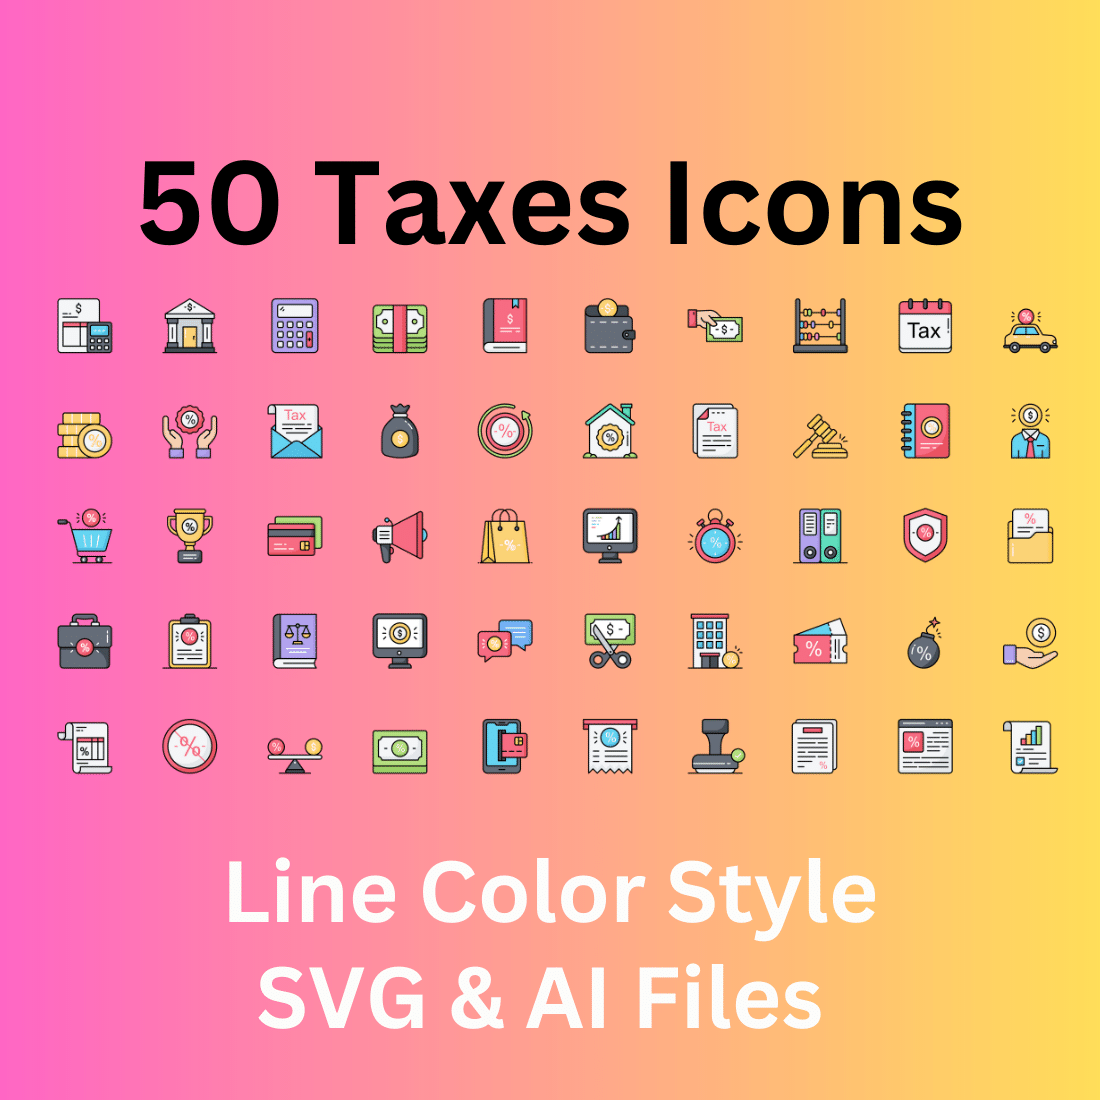 Taxes Icon Set 50 Line Color Finance Icons - SVG And AI Files cover image.